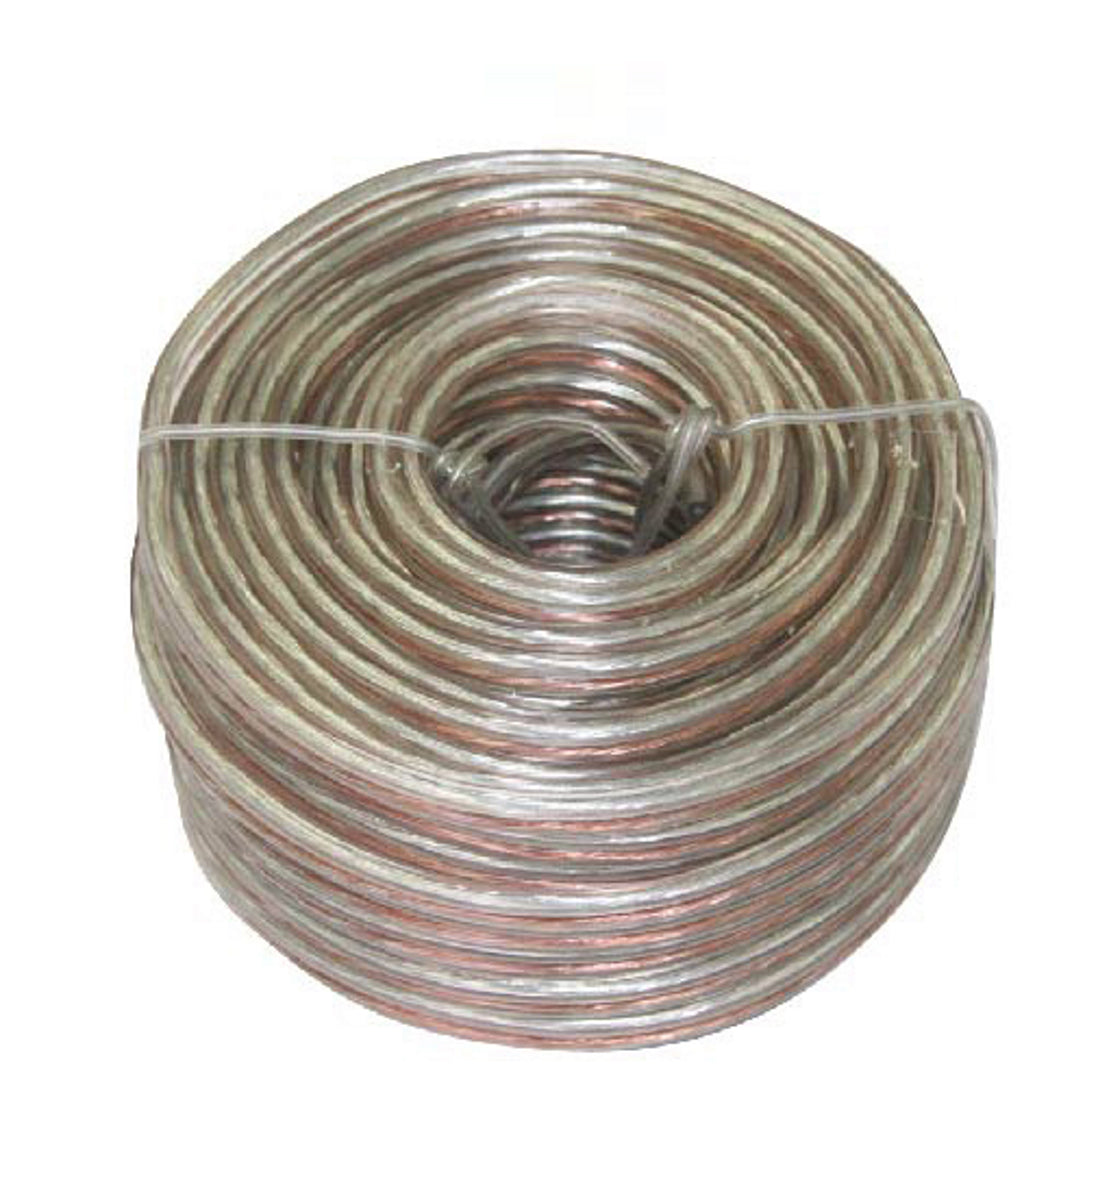 Trisonic 18 Gauge 50 ft. Speaker Wire, Use for Home Theater Speakers, Car Speakers and more